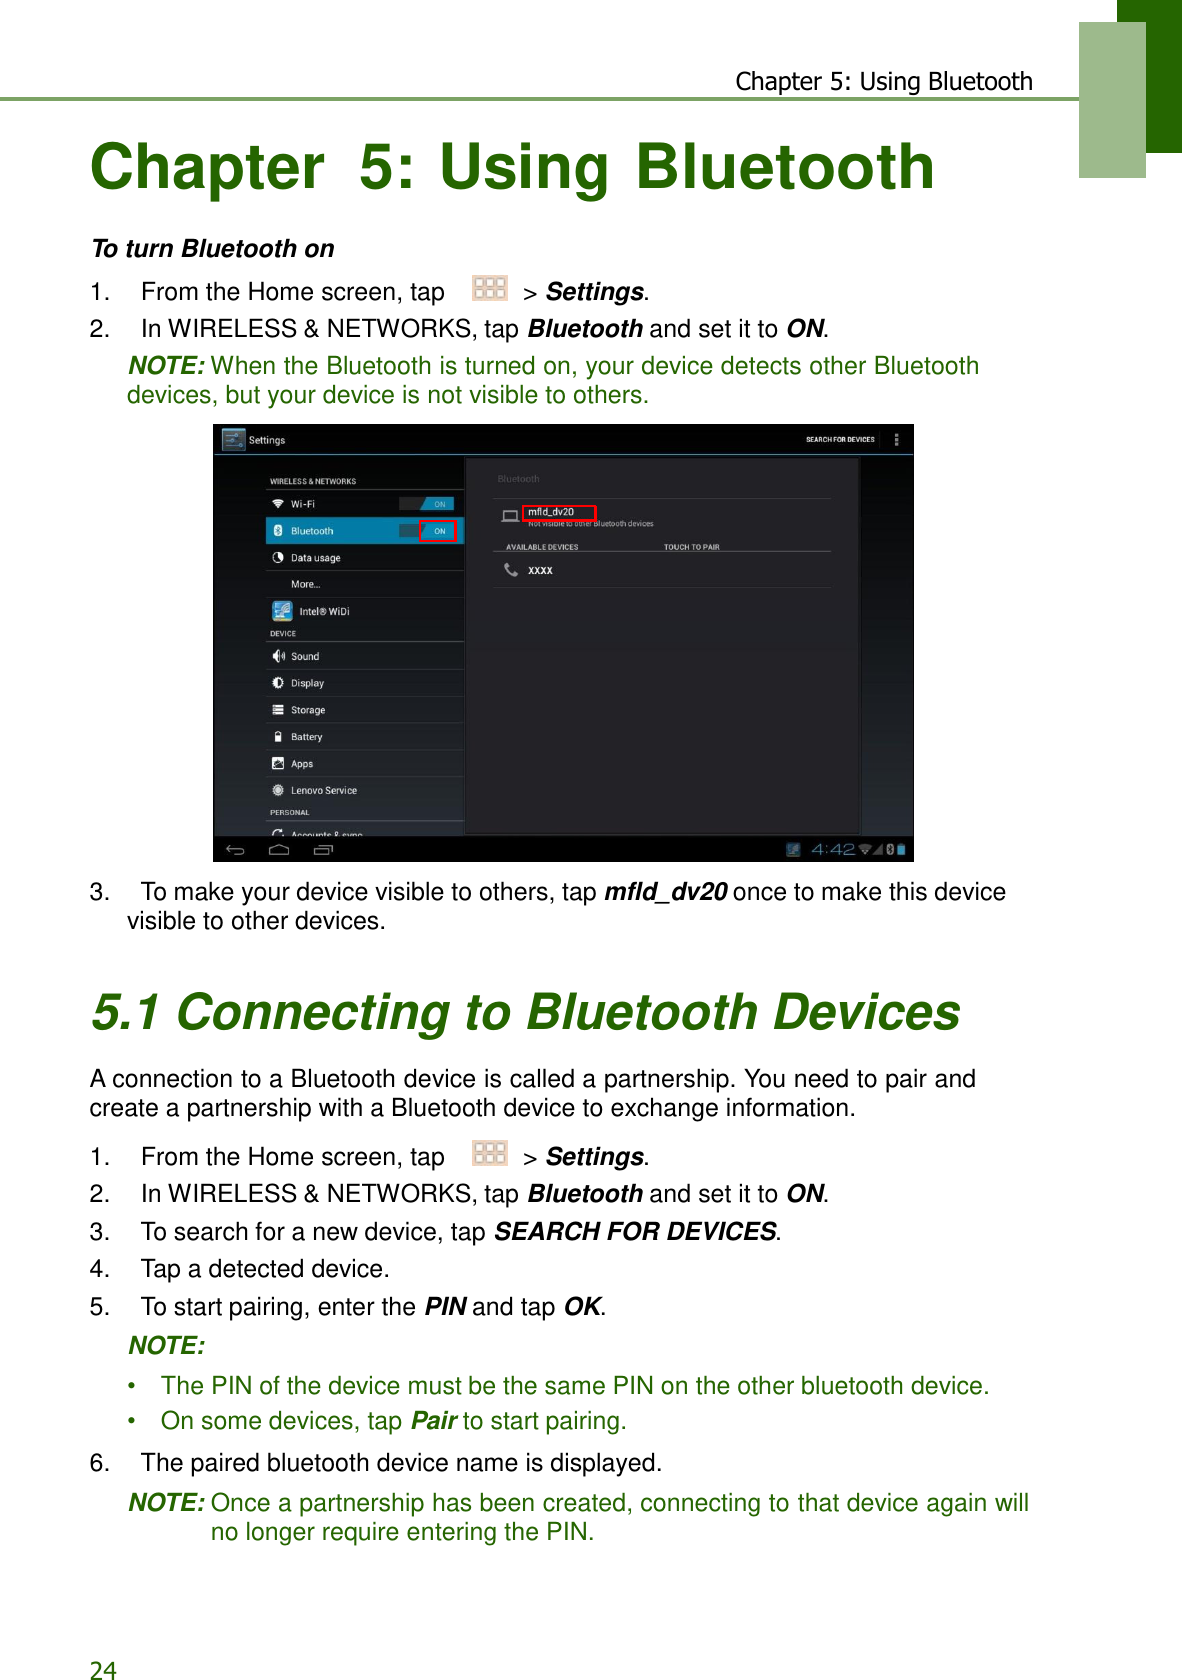 24 Chapter 5: Using Bluetooth    Chapter  5: Using Bluetooth   To turn Bluetooth on  1.    From the Home screen, tap     &gt; Settings. 2.    In WIRELESS &amp; NETWORKS, tap Bluetooth and set it to ON. NOTE: When the Bluetooth is turned on, your device detects other Bluetooth devices, but your device is not visible to others.                       3.    To make your device visible to others, tap mfld_dv20 once to make this device visible to other devices.   5.1 Connecting to Bluetooth Devices  A connection to a Bluetooth device is called a partnership. You need to pair and create a partnership with a Bluetooth device to exchange information.  1.    From the Home screen, tap     &gt; Settings. 2.    In WIRELESS &amp; NETWORKS, tap Bluetooth and set it to ON. 3.    To search for a new device, tap SEARCH FOR DEVICES. 4.    Tap a detected device. 5.    To start pairing, enter the PIN and tap OK.  NOTE:  •    The PIN of the device must be the same PIN on the other bluetooth device. •   On some devices, tap Pair to start pairing.  6.    The paired bluetooth device name is displayed.  NOTE: Once a partnership has been created, connecting to that device again will no longer require entering the PIN. 